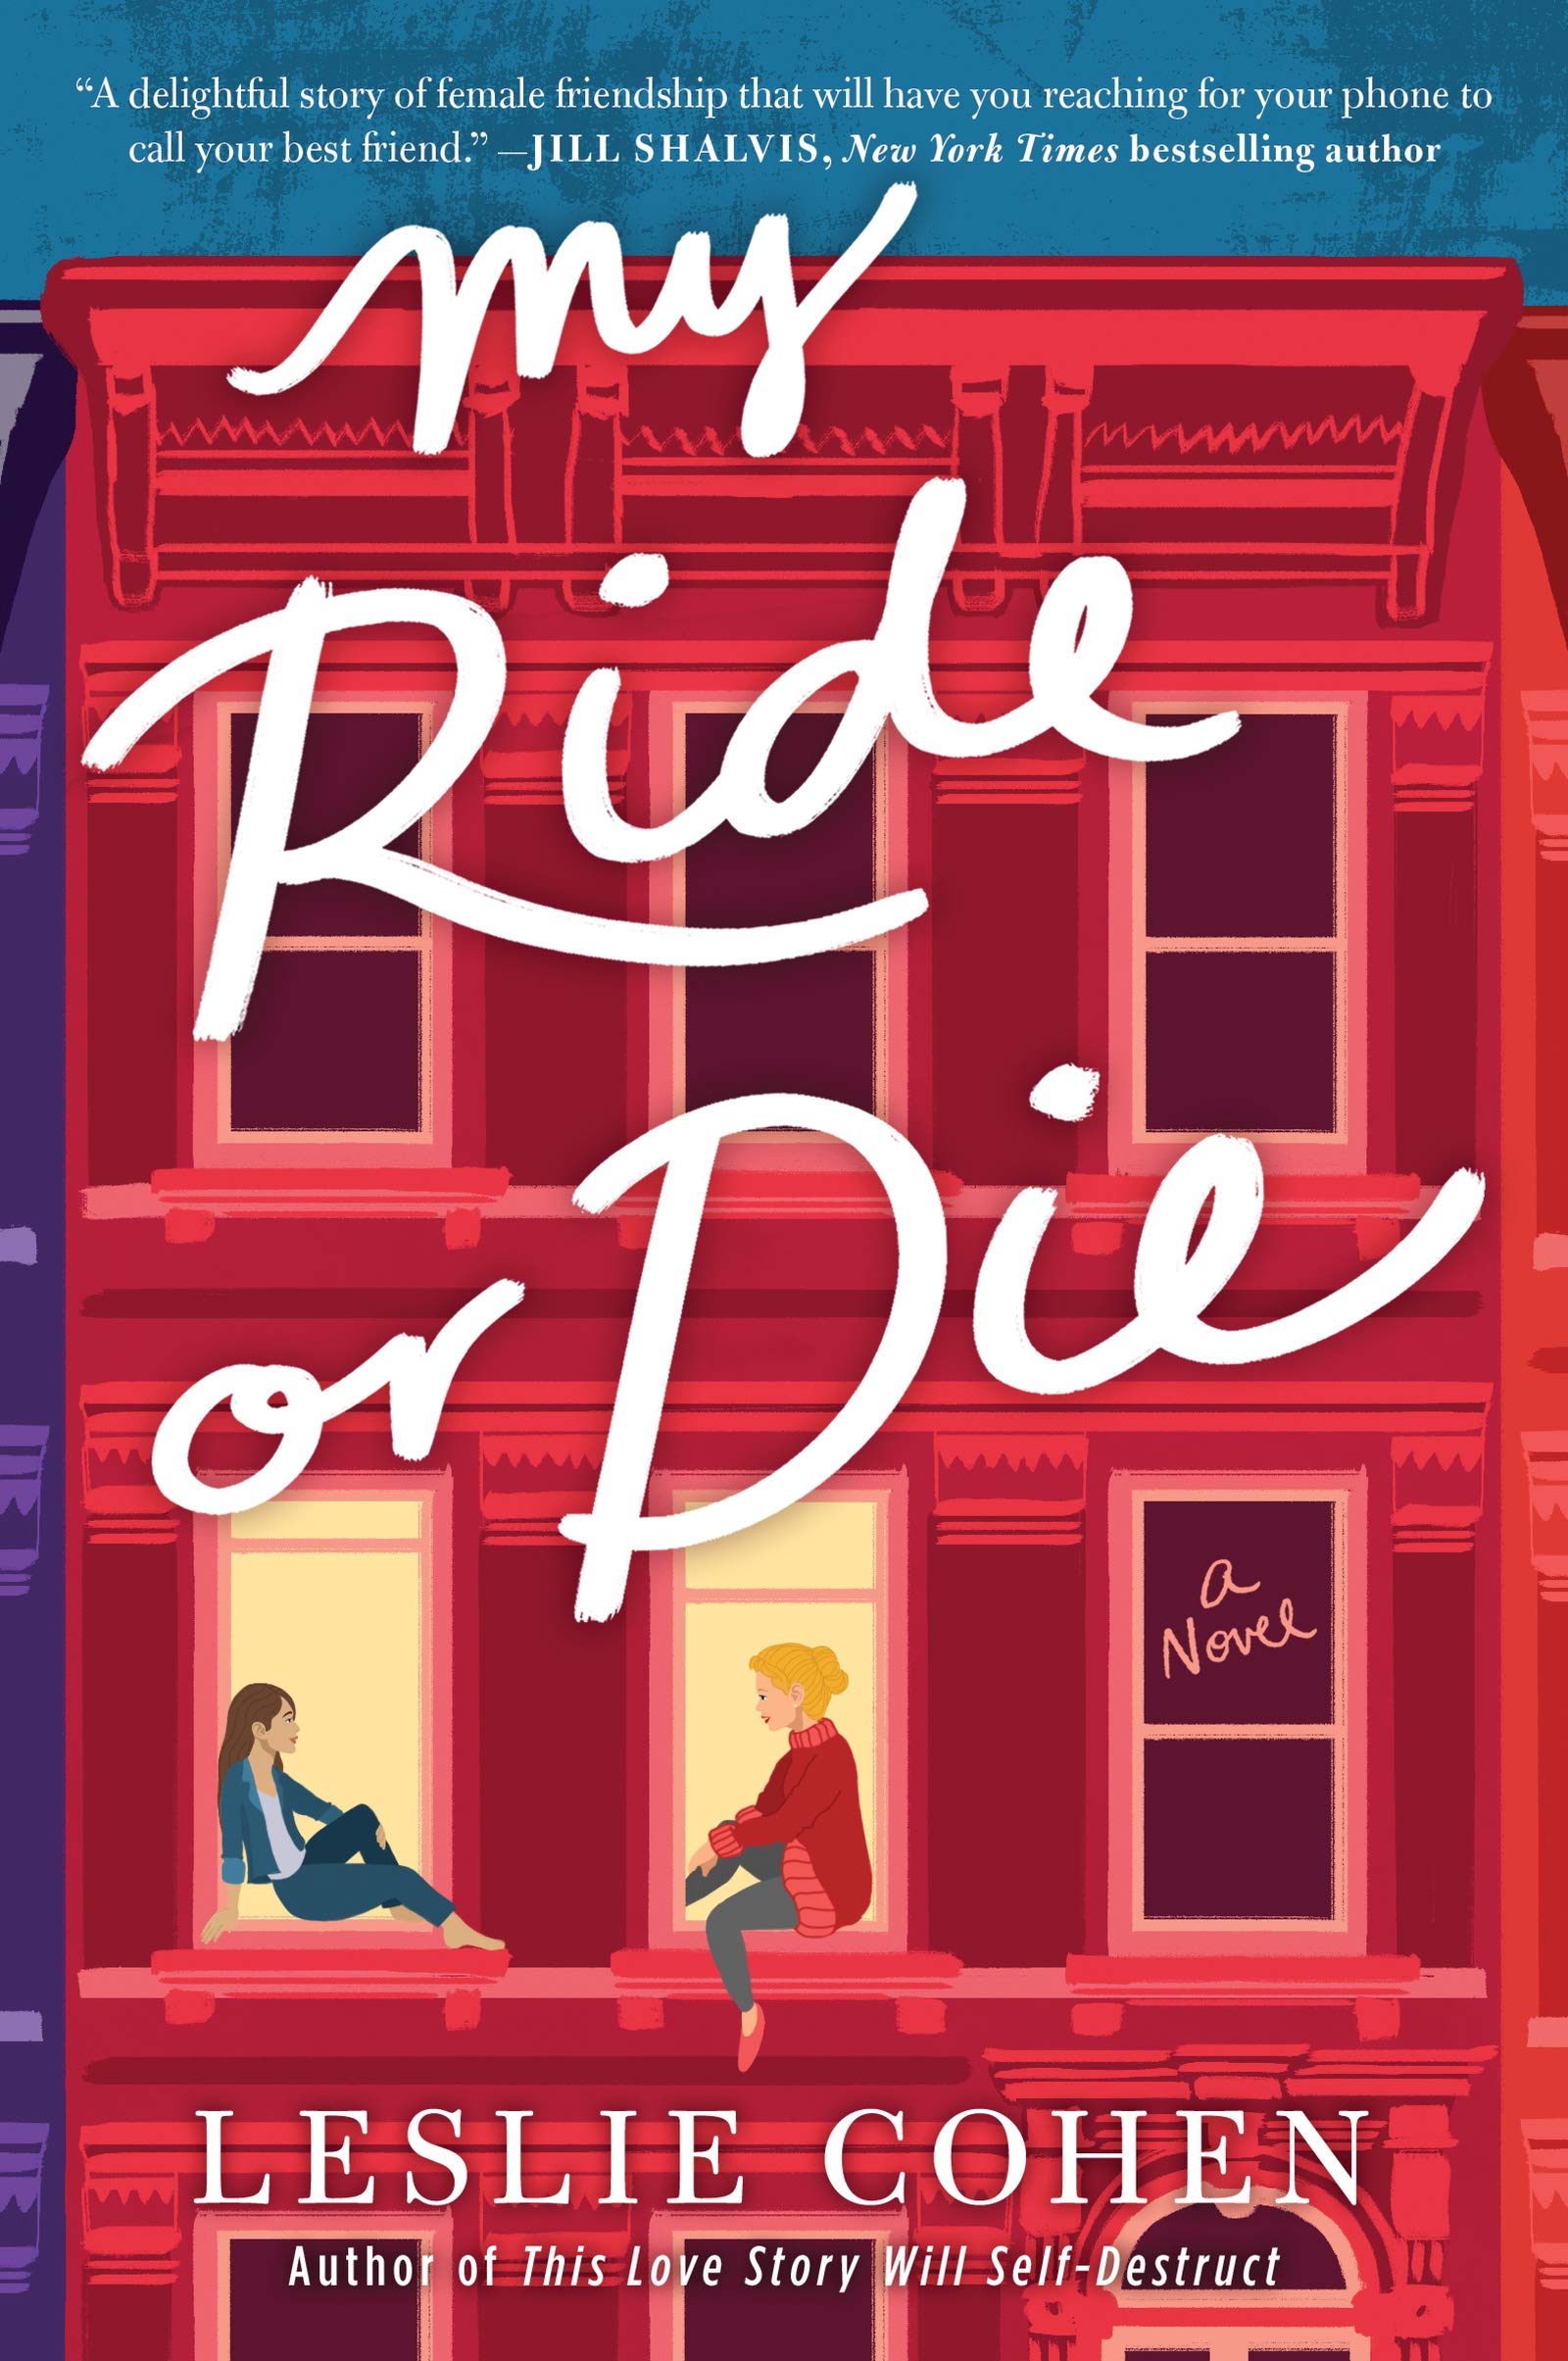 Book cover of "My Ride or Die" by Leslie Cohen